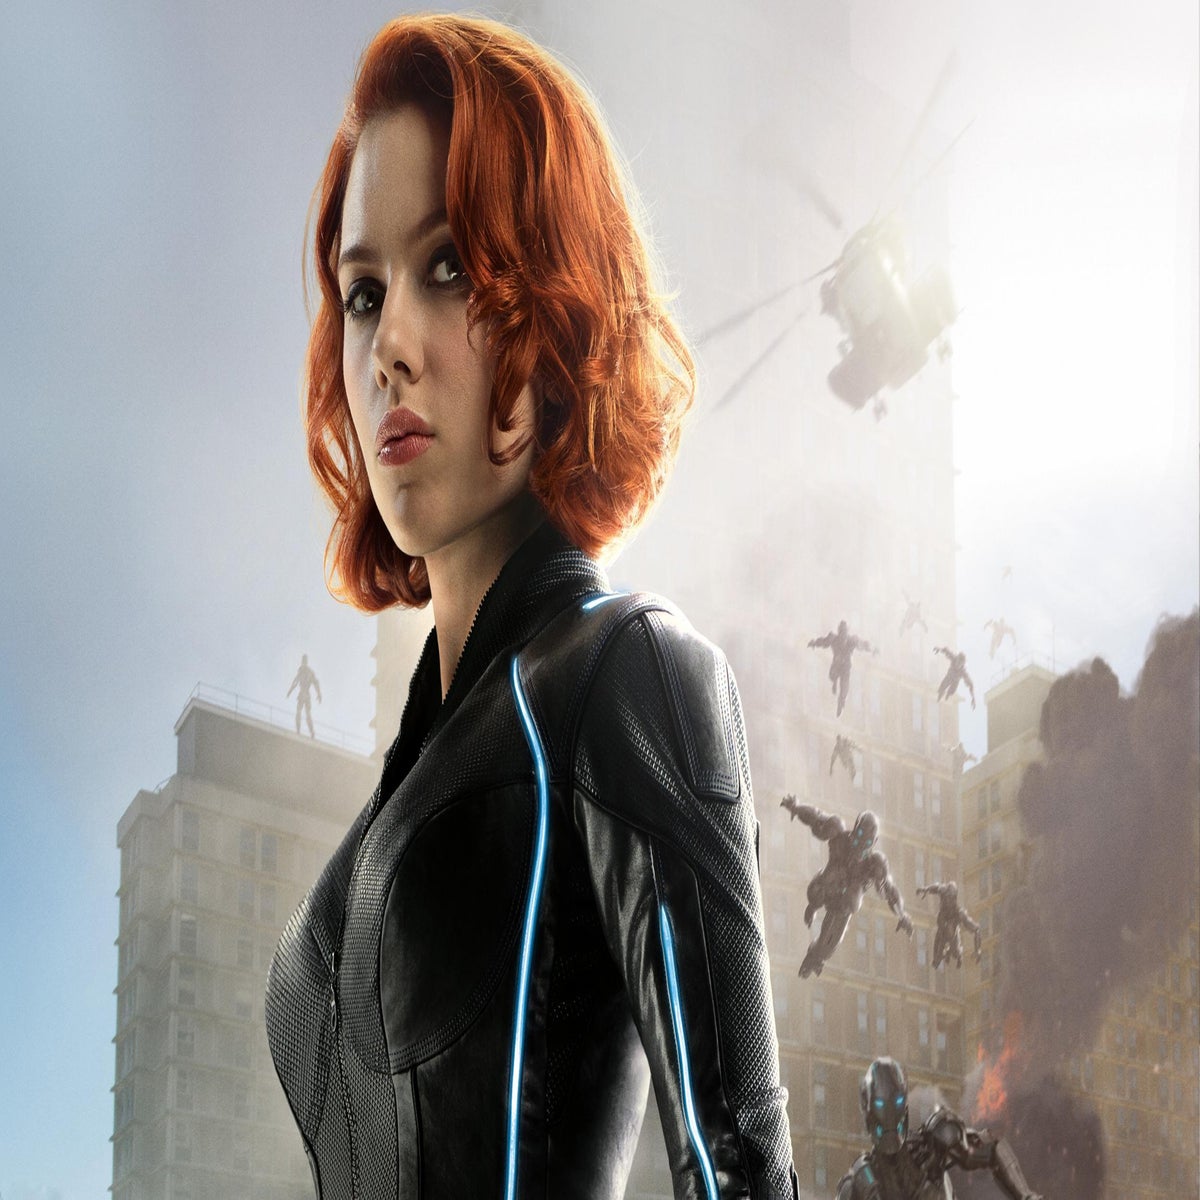 Captain America actor Chris Evans may have confirmed a Black Widow